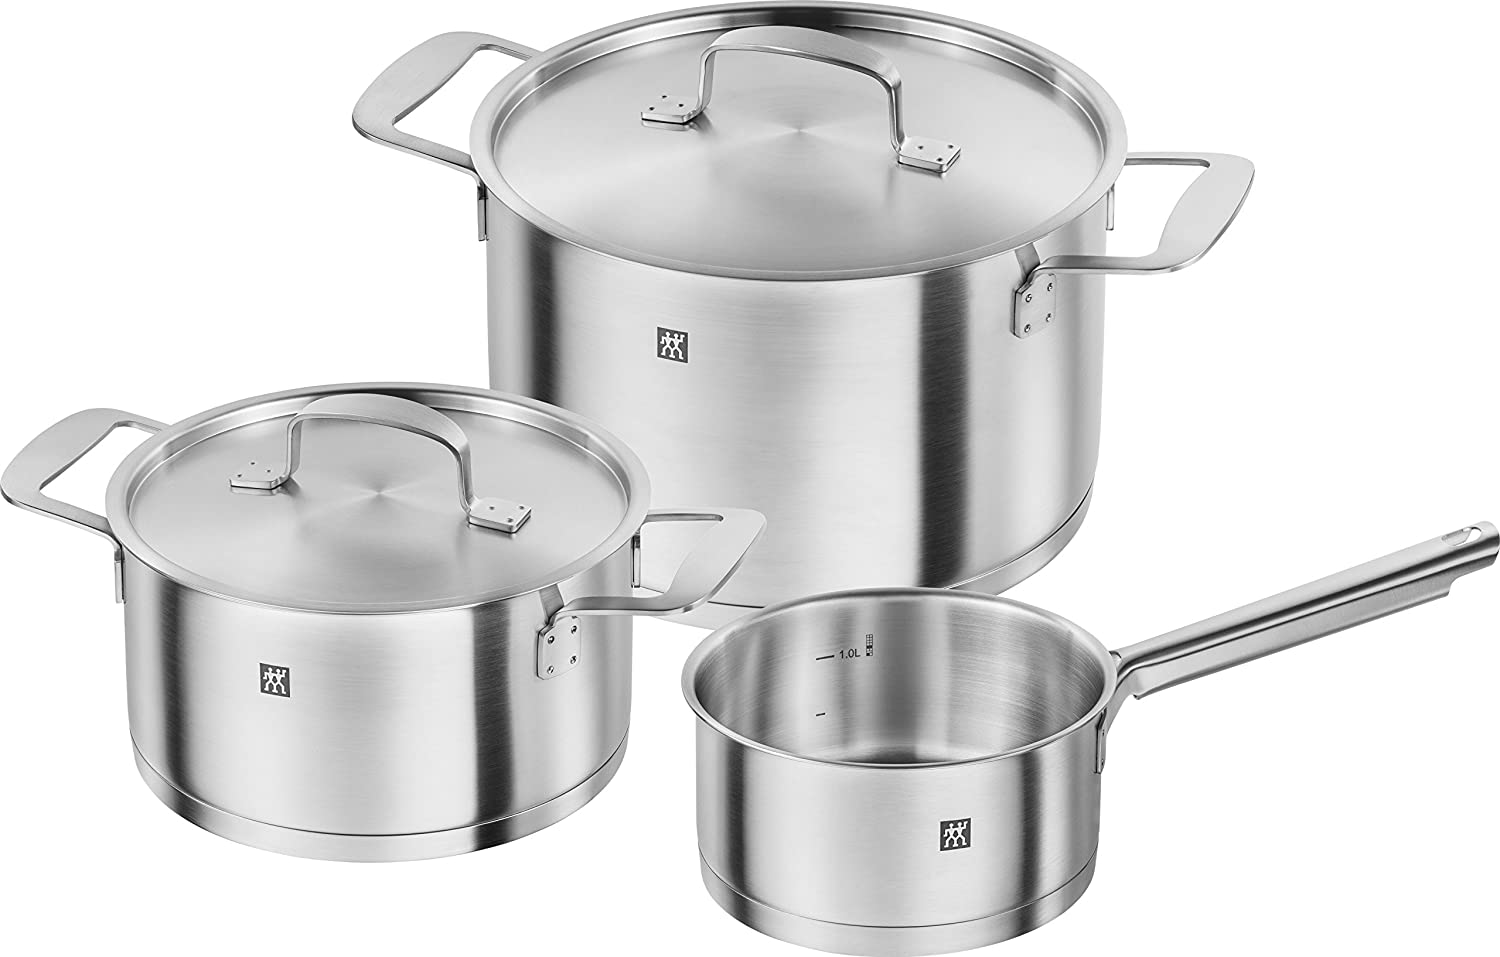 Zwilling Cookware Set, 3-Piece Stainless Steel, Silver, 530 cm, 3 Units